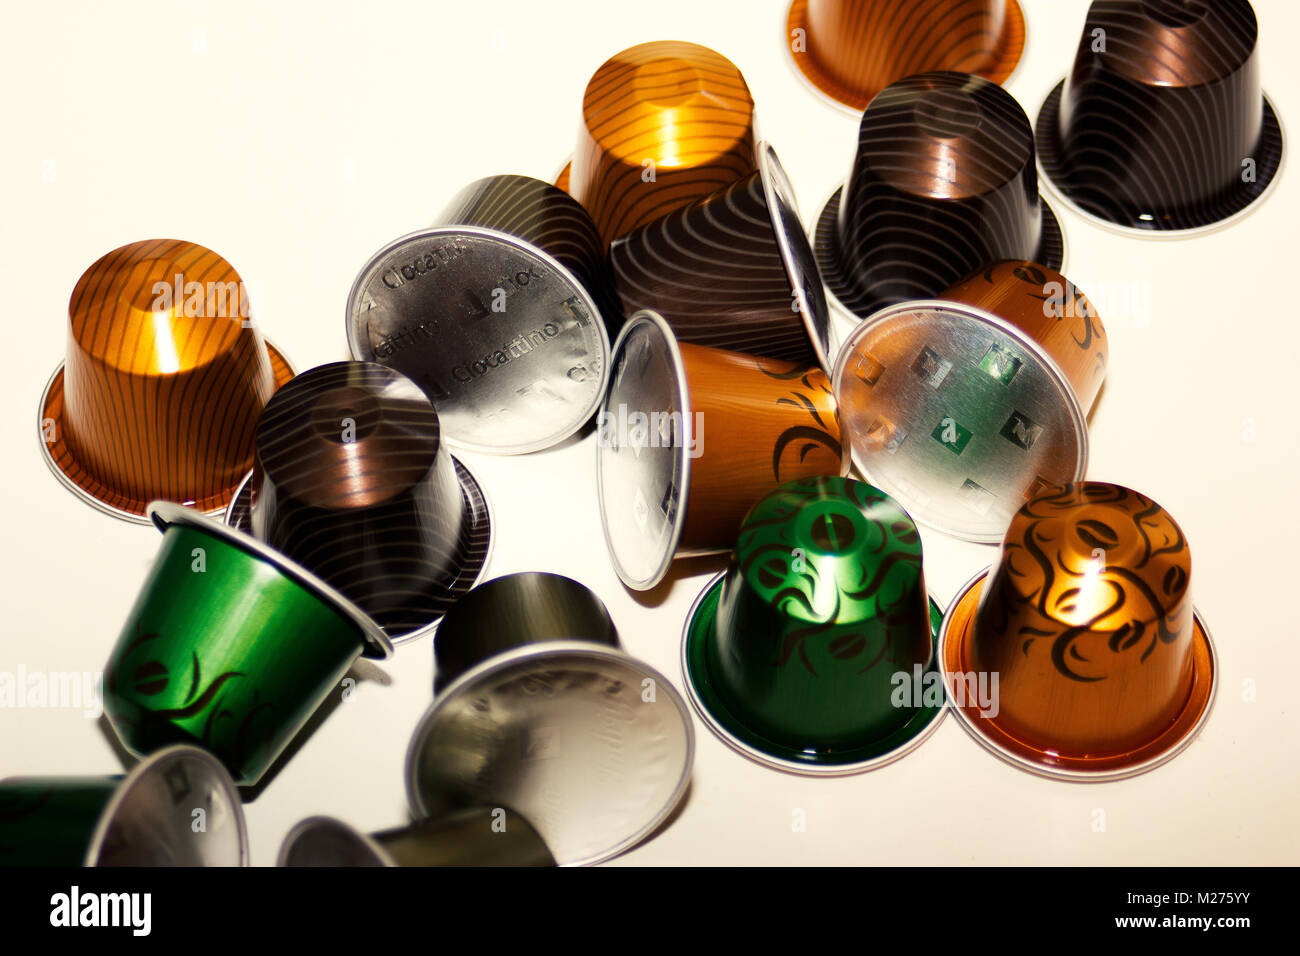 various new 'limited edition' colorful nespresso coffee pods/ capsules on white background Stock Photo